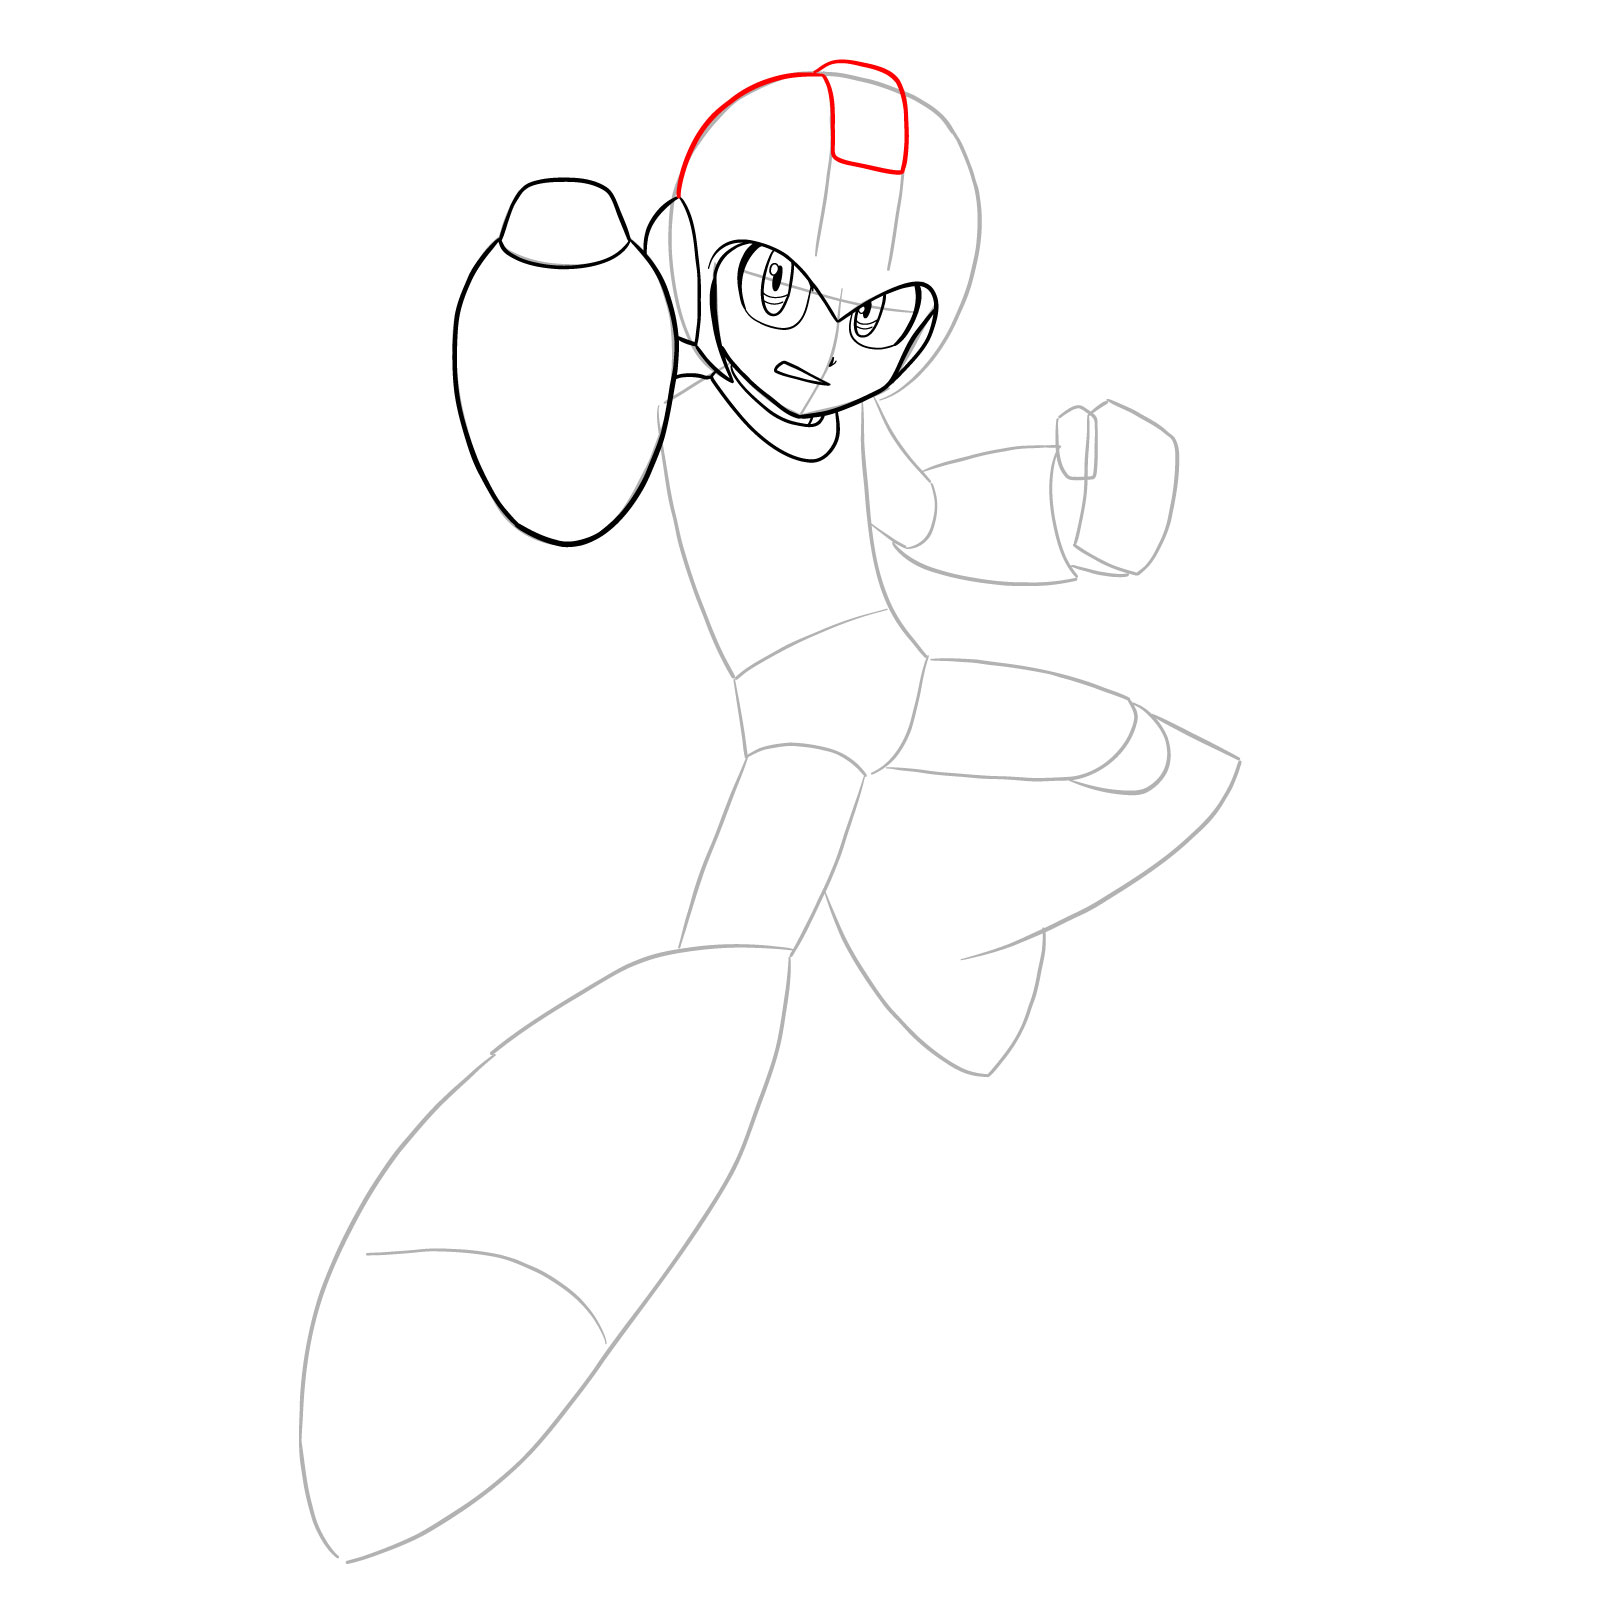 How to draw Mega Man from the 11th game - step 13